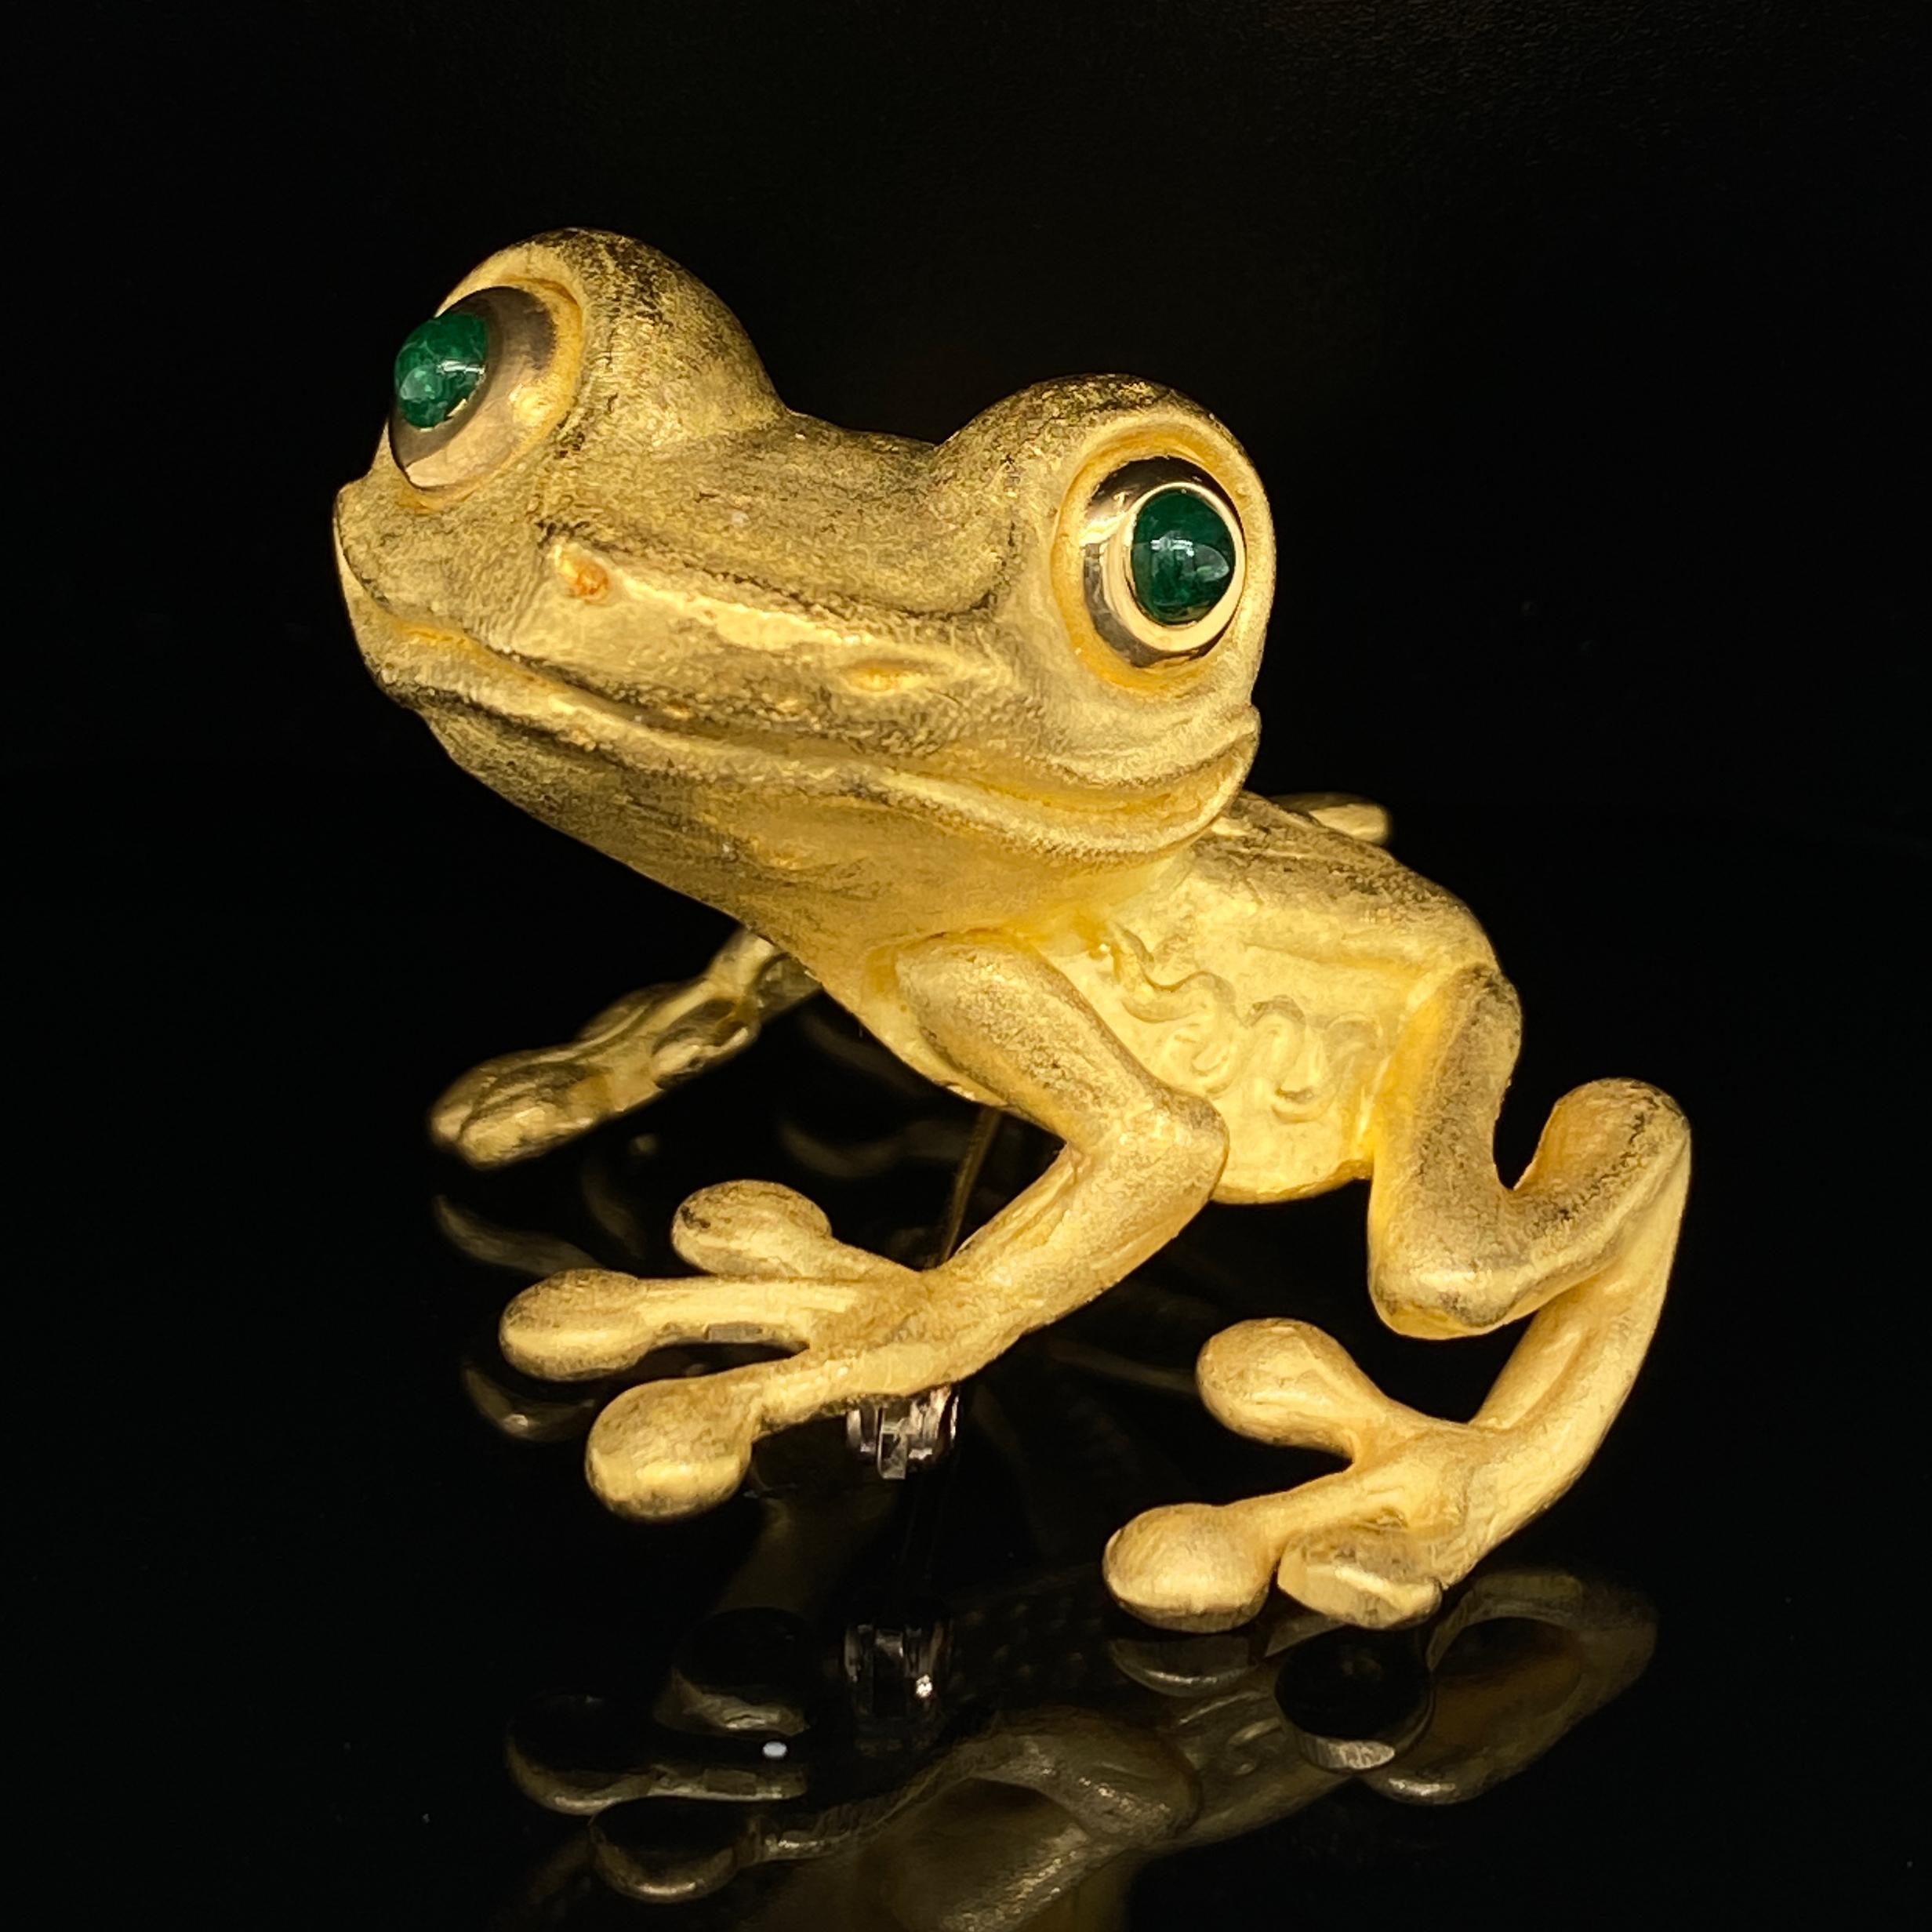 This winsome, extremely large frog was custom made in 2000 by Denise Roberge for a frog-loving lady who wore a lot of pins.  She apparently wore extremely heavyweight clothing (armor? felt?) because this pin weighs over 60 grams.  He's also